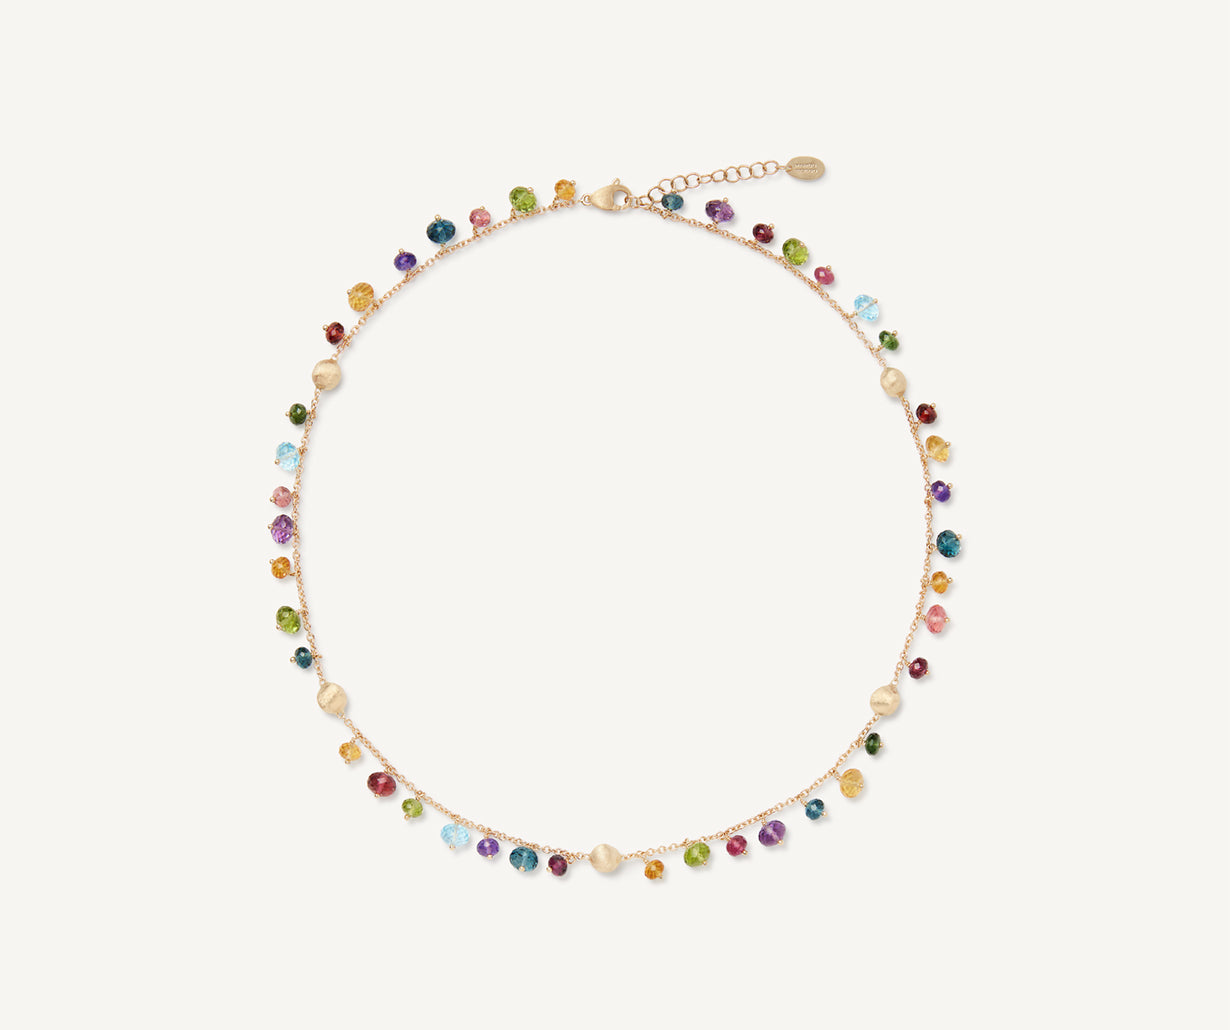 18K YELLOW GOLD MIXED GEMSTONE NECKLACE FROM THE AFRICA GEMSTONE COLLECTION